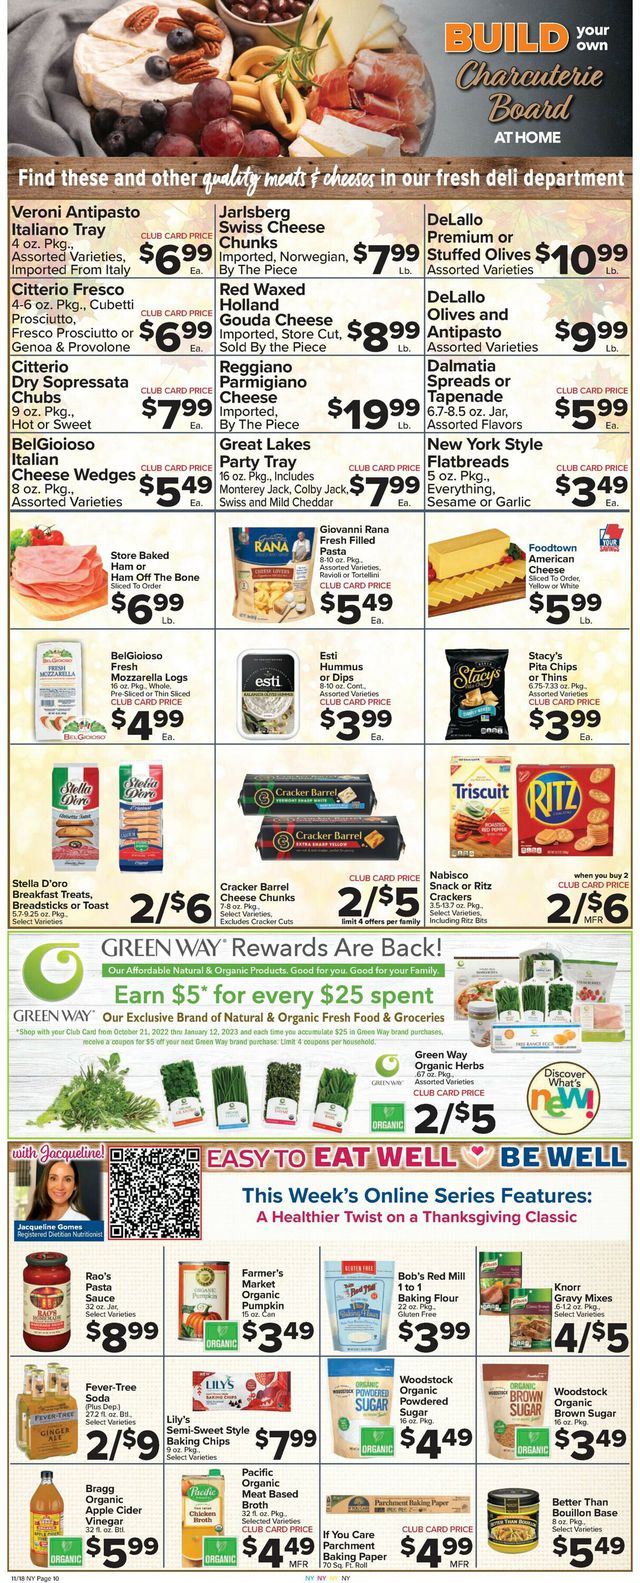 Foodtown Ad from 11/18/2022